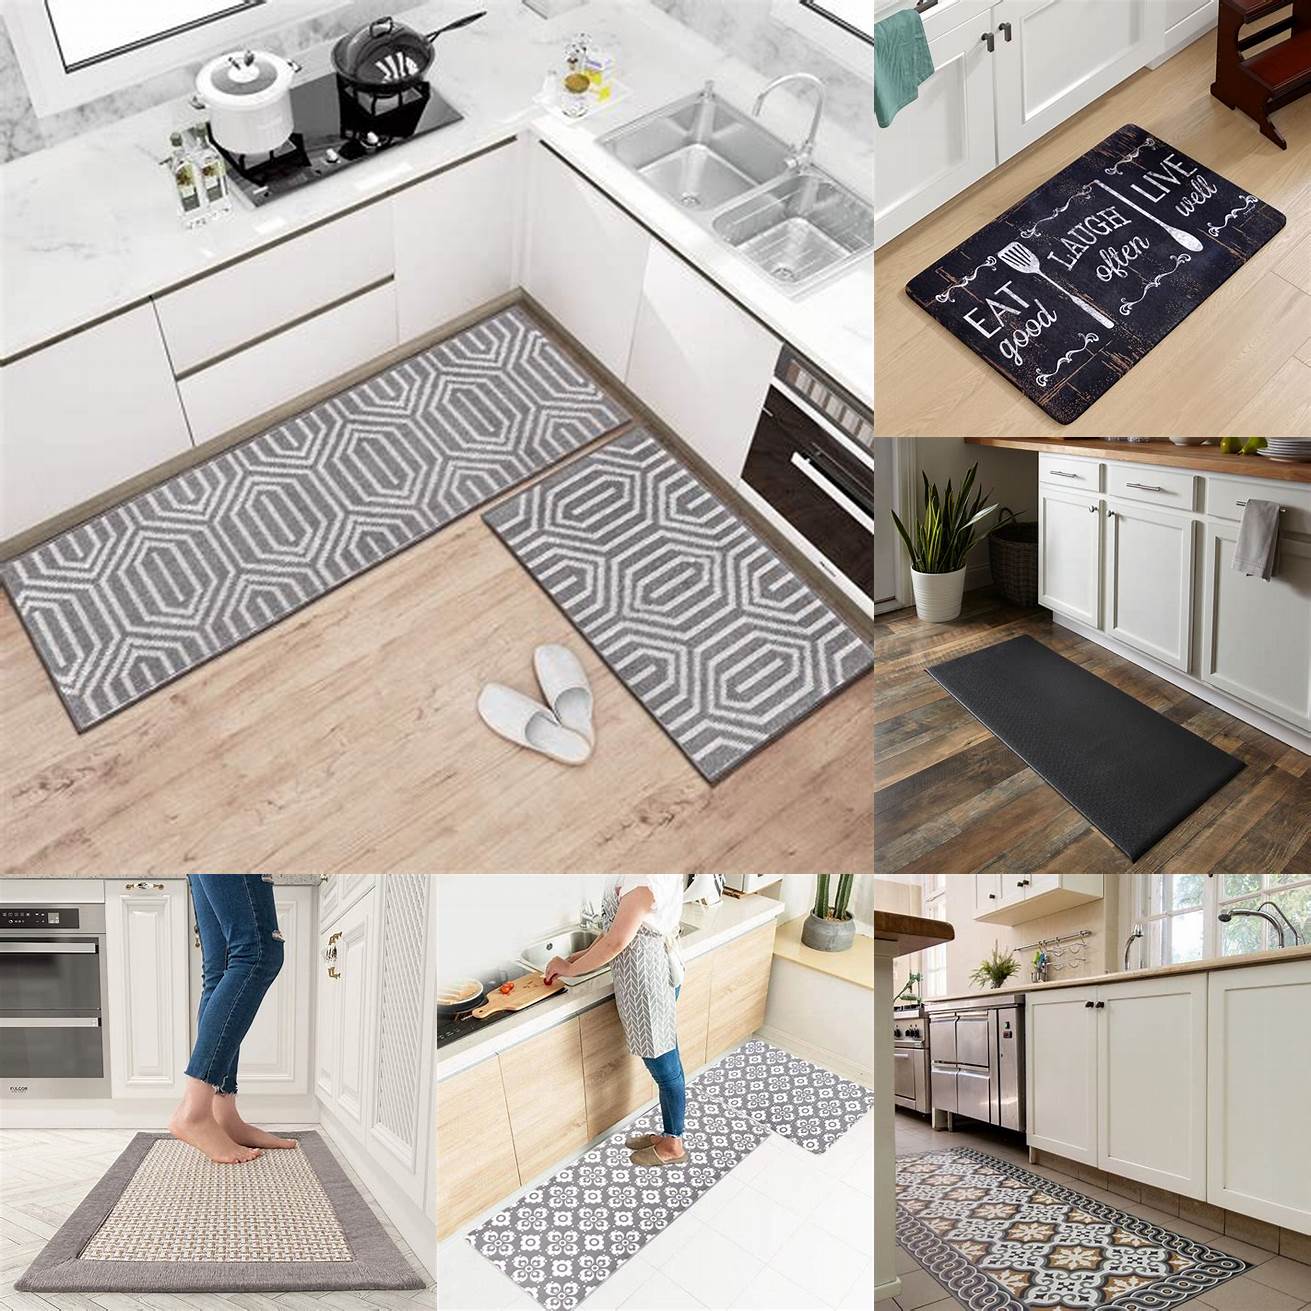 1 Choose a mat that fits your kitchen and your needs